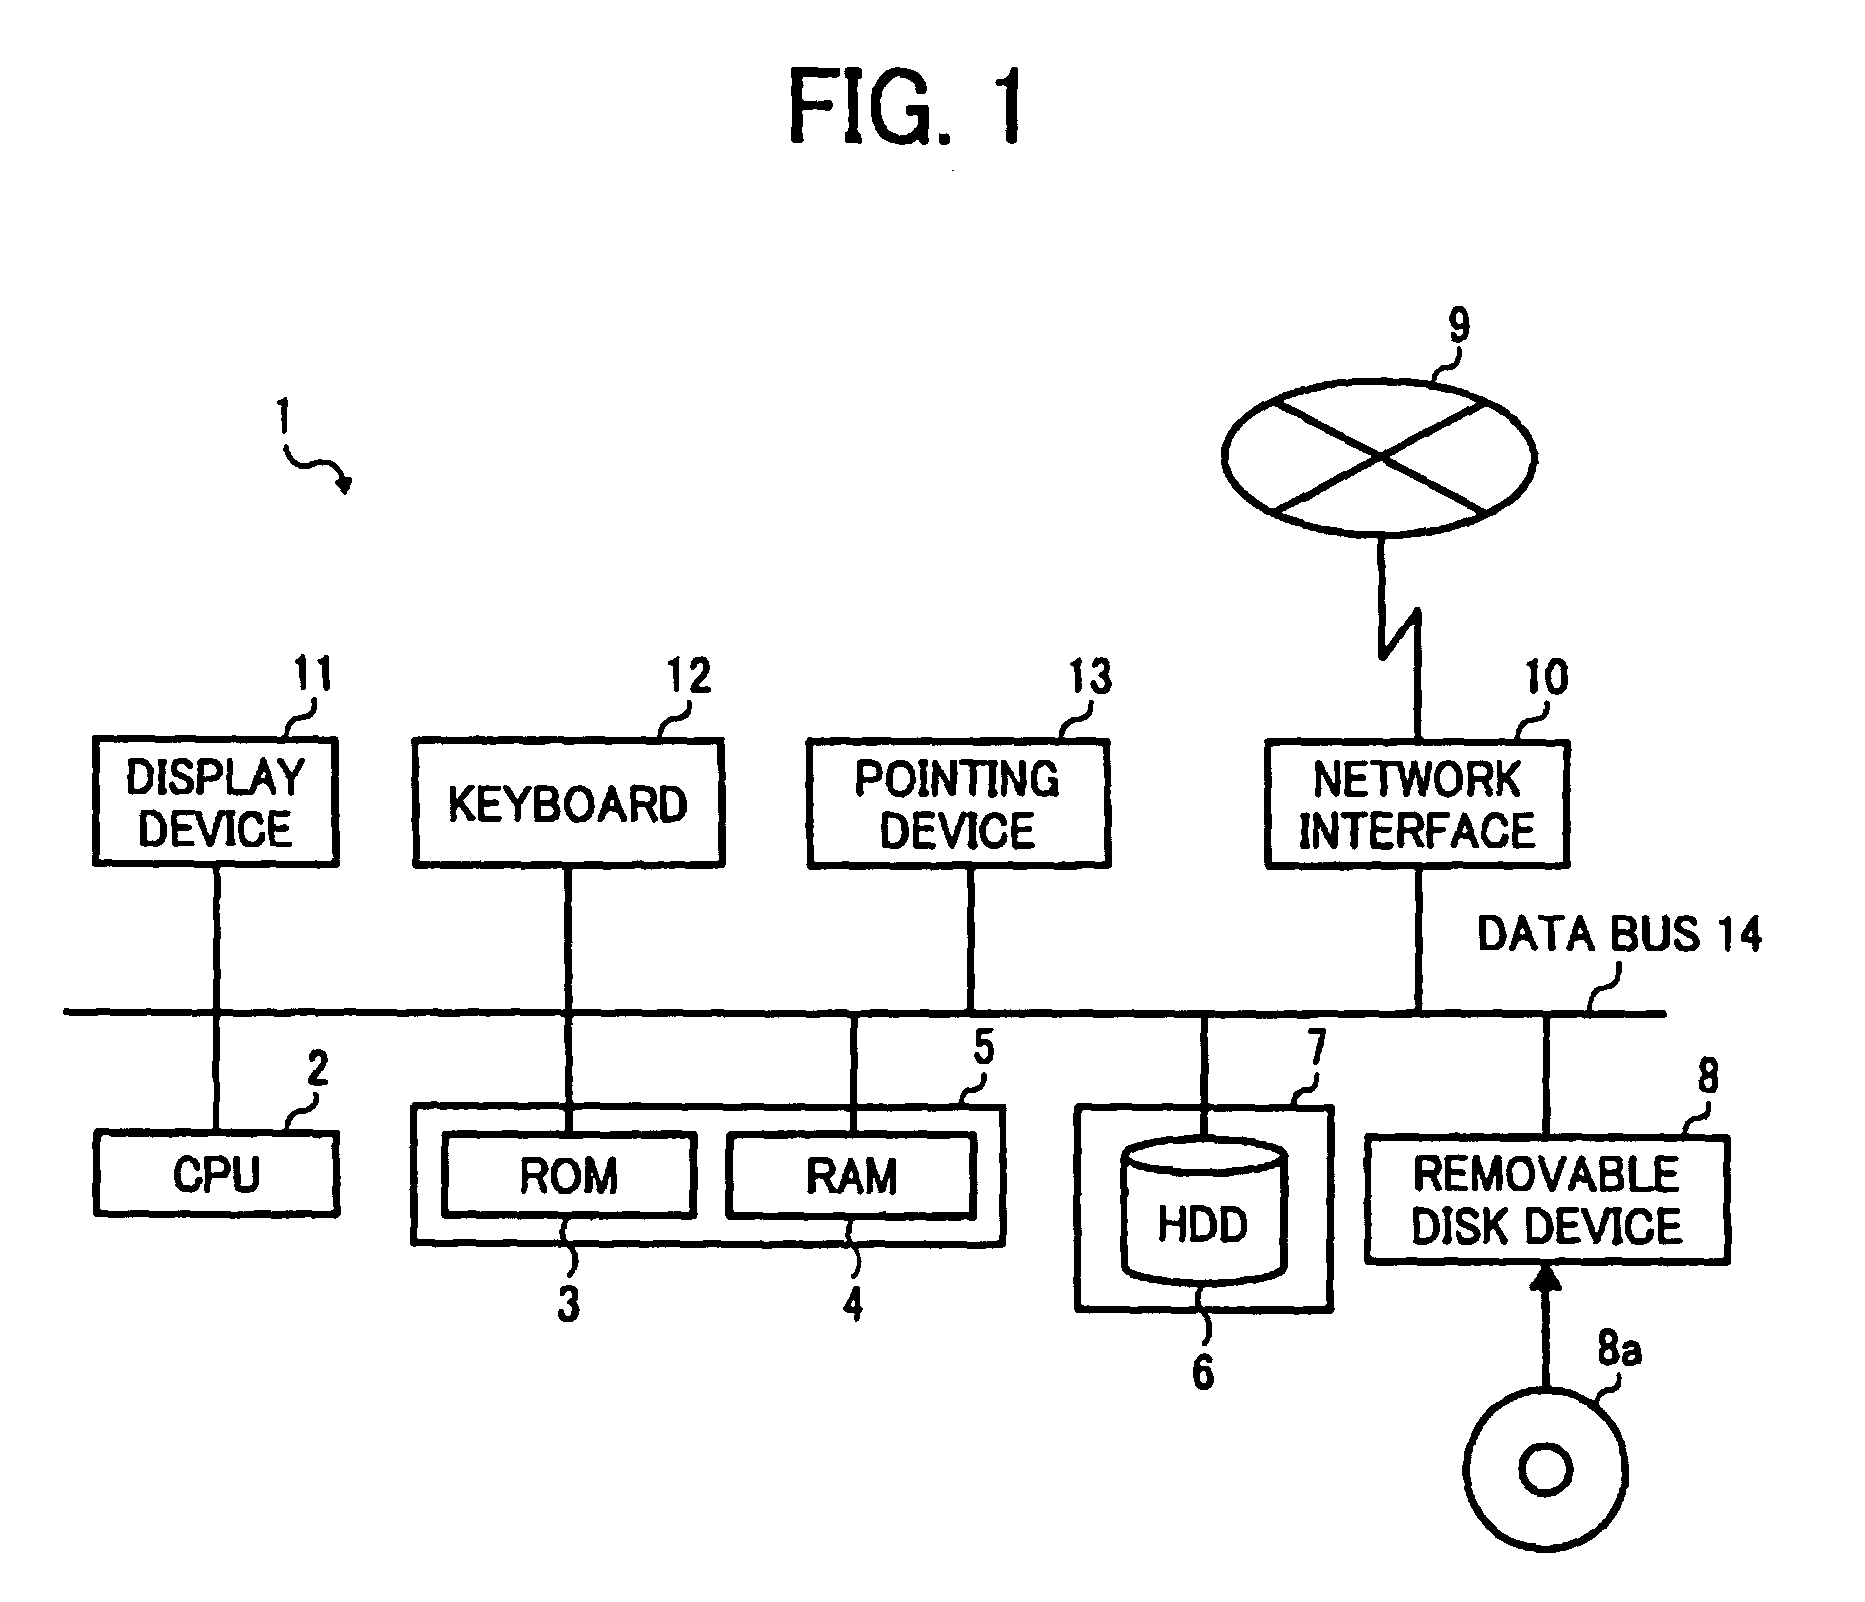 Data processing apparatus, method, and computer program product for user objective prediction